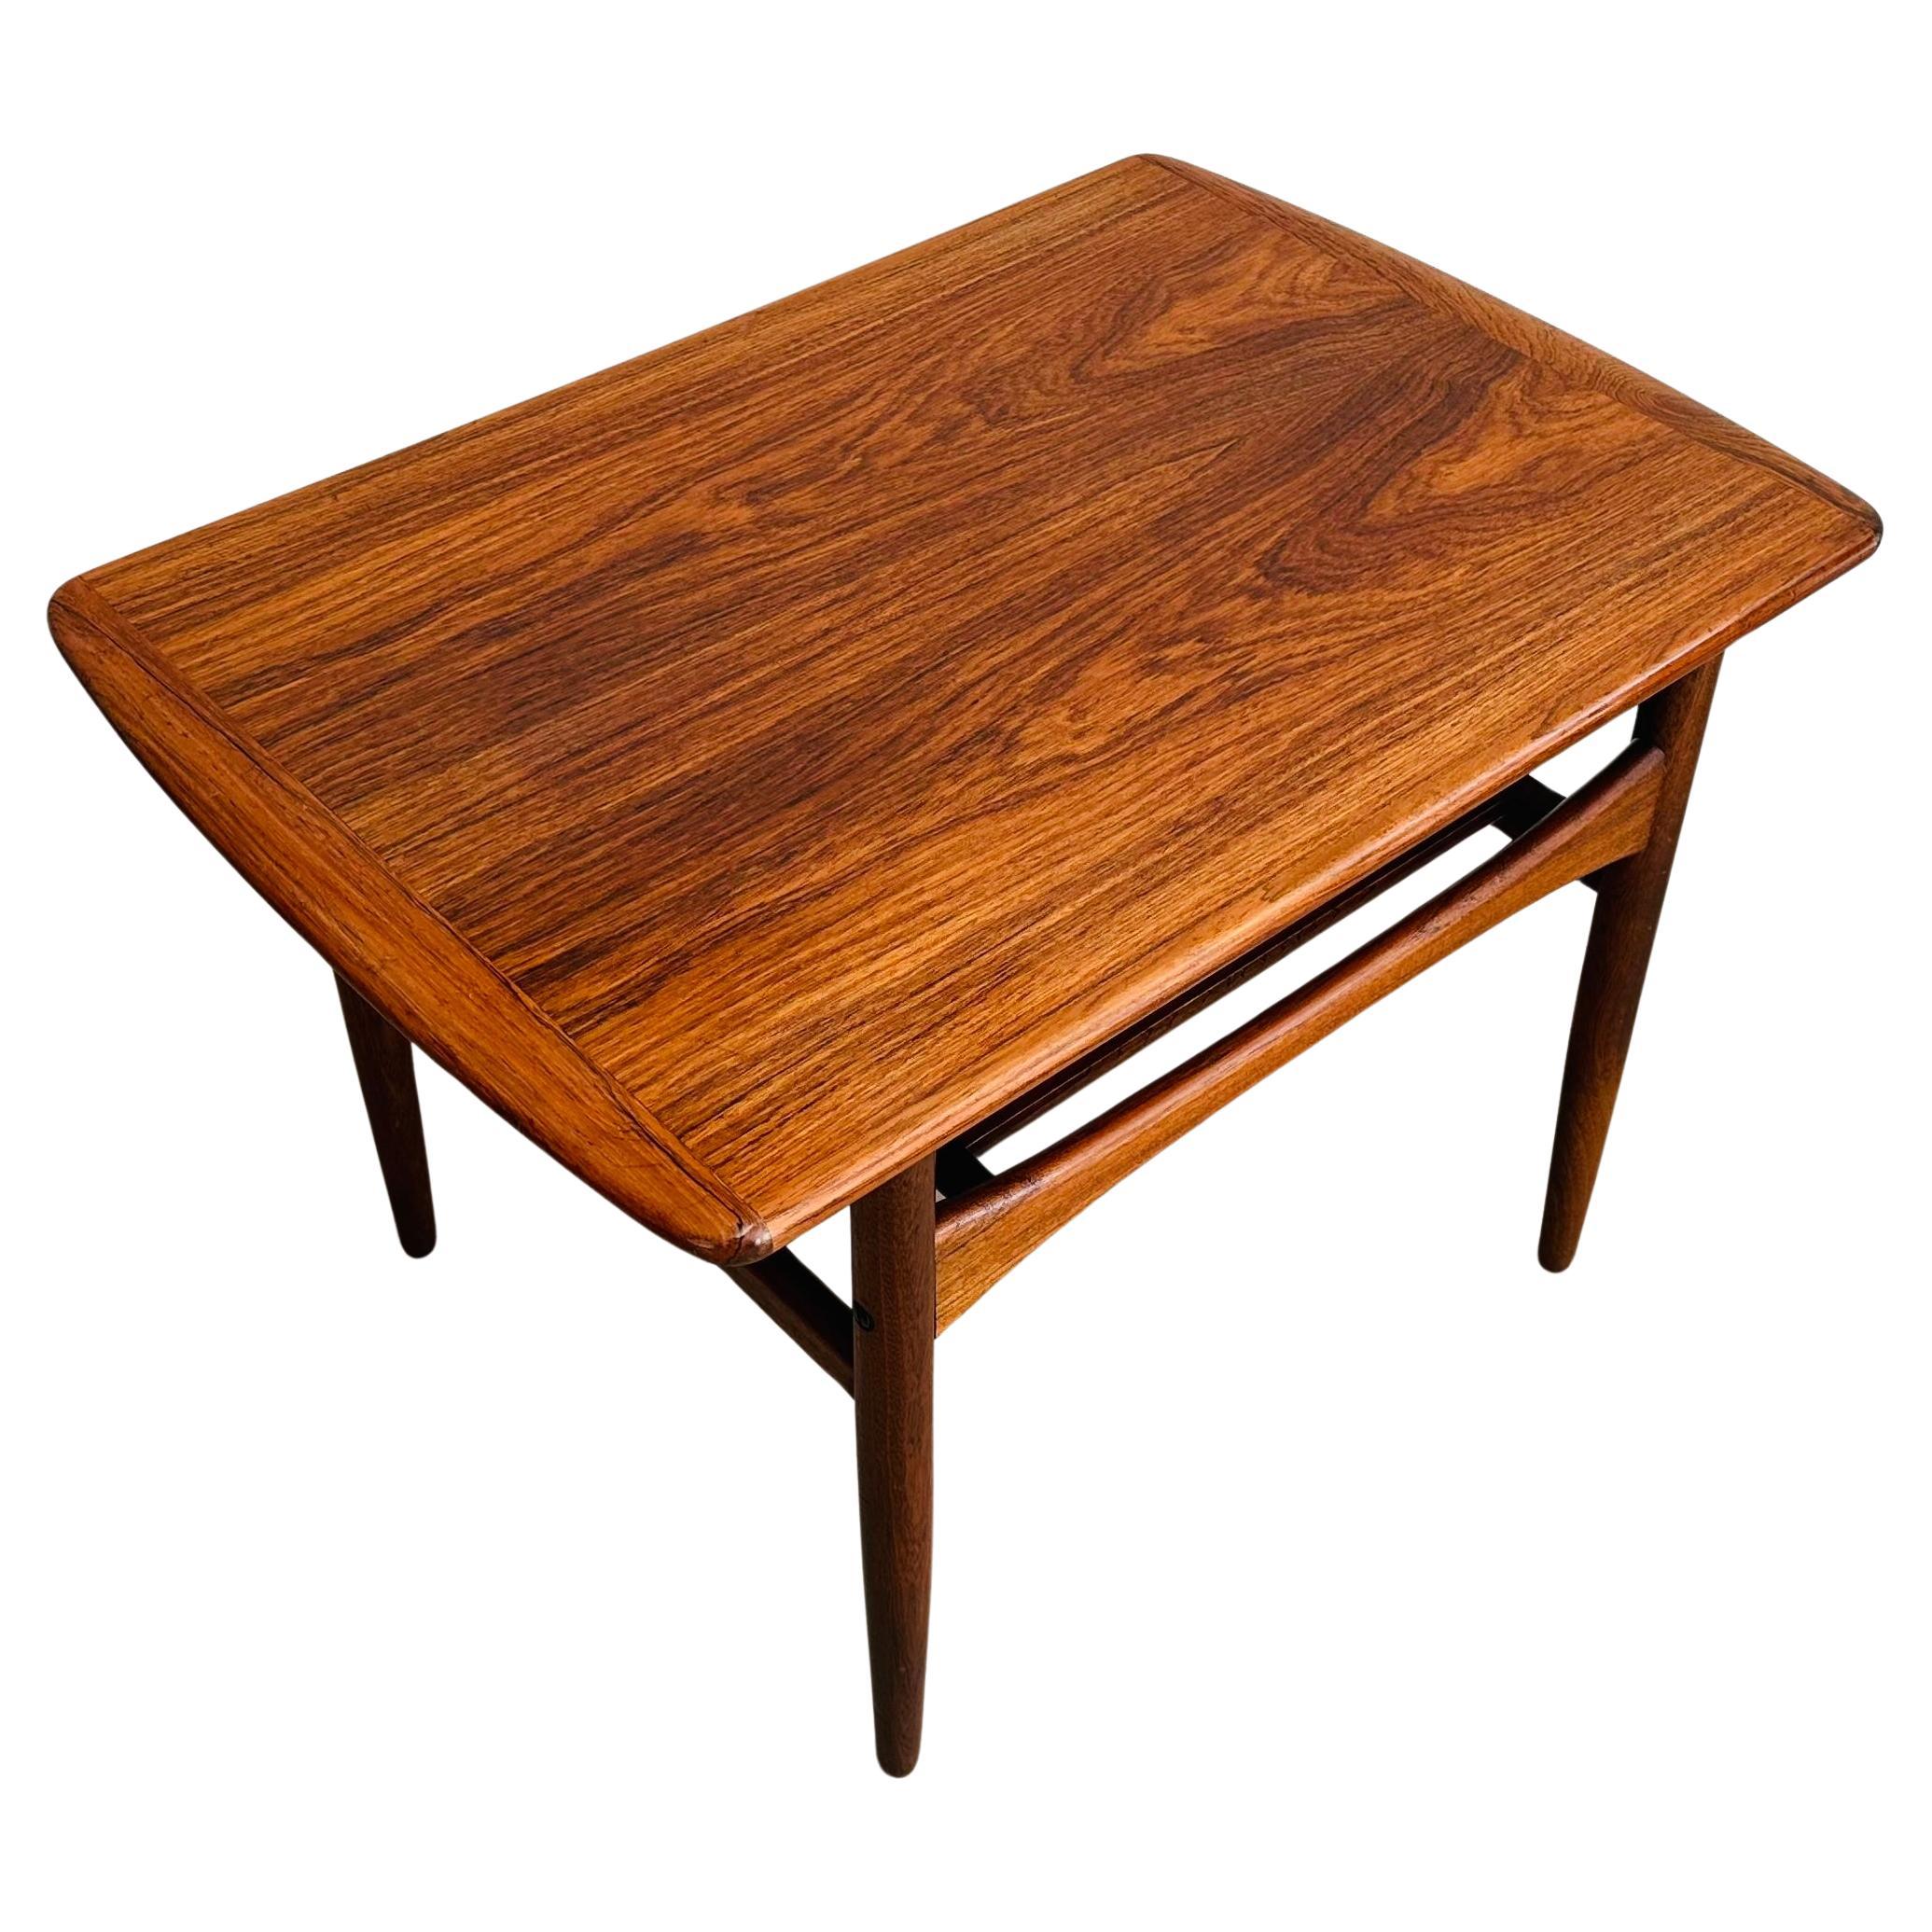 1960s Danish Arrebo Møbler Rosewood Side or Coffee Table by Robert Christensen For Sale